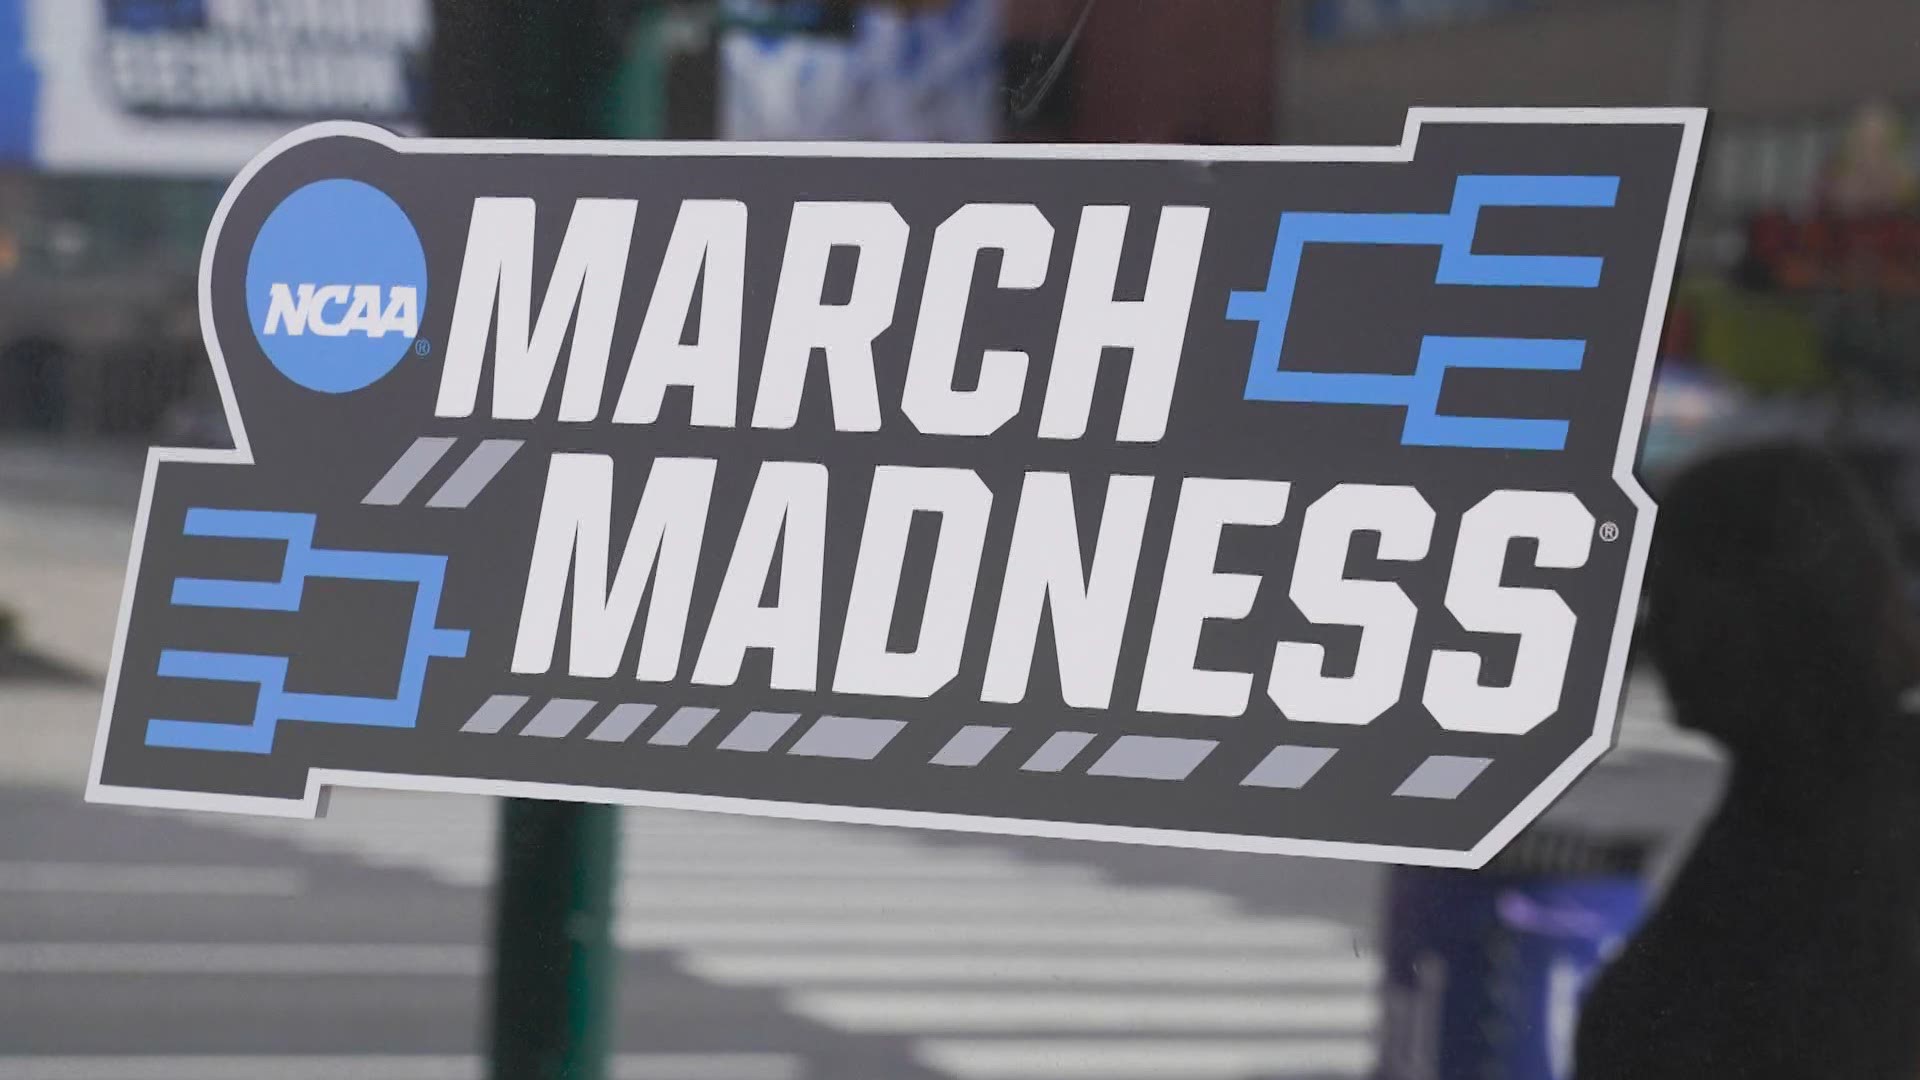 There is outrage on social media tonight after photos from the men's and women's NCAA March Madness tournaments appear to show two very different set-ups.